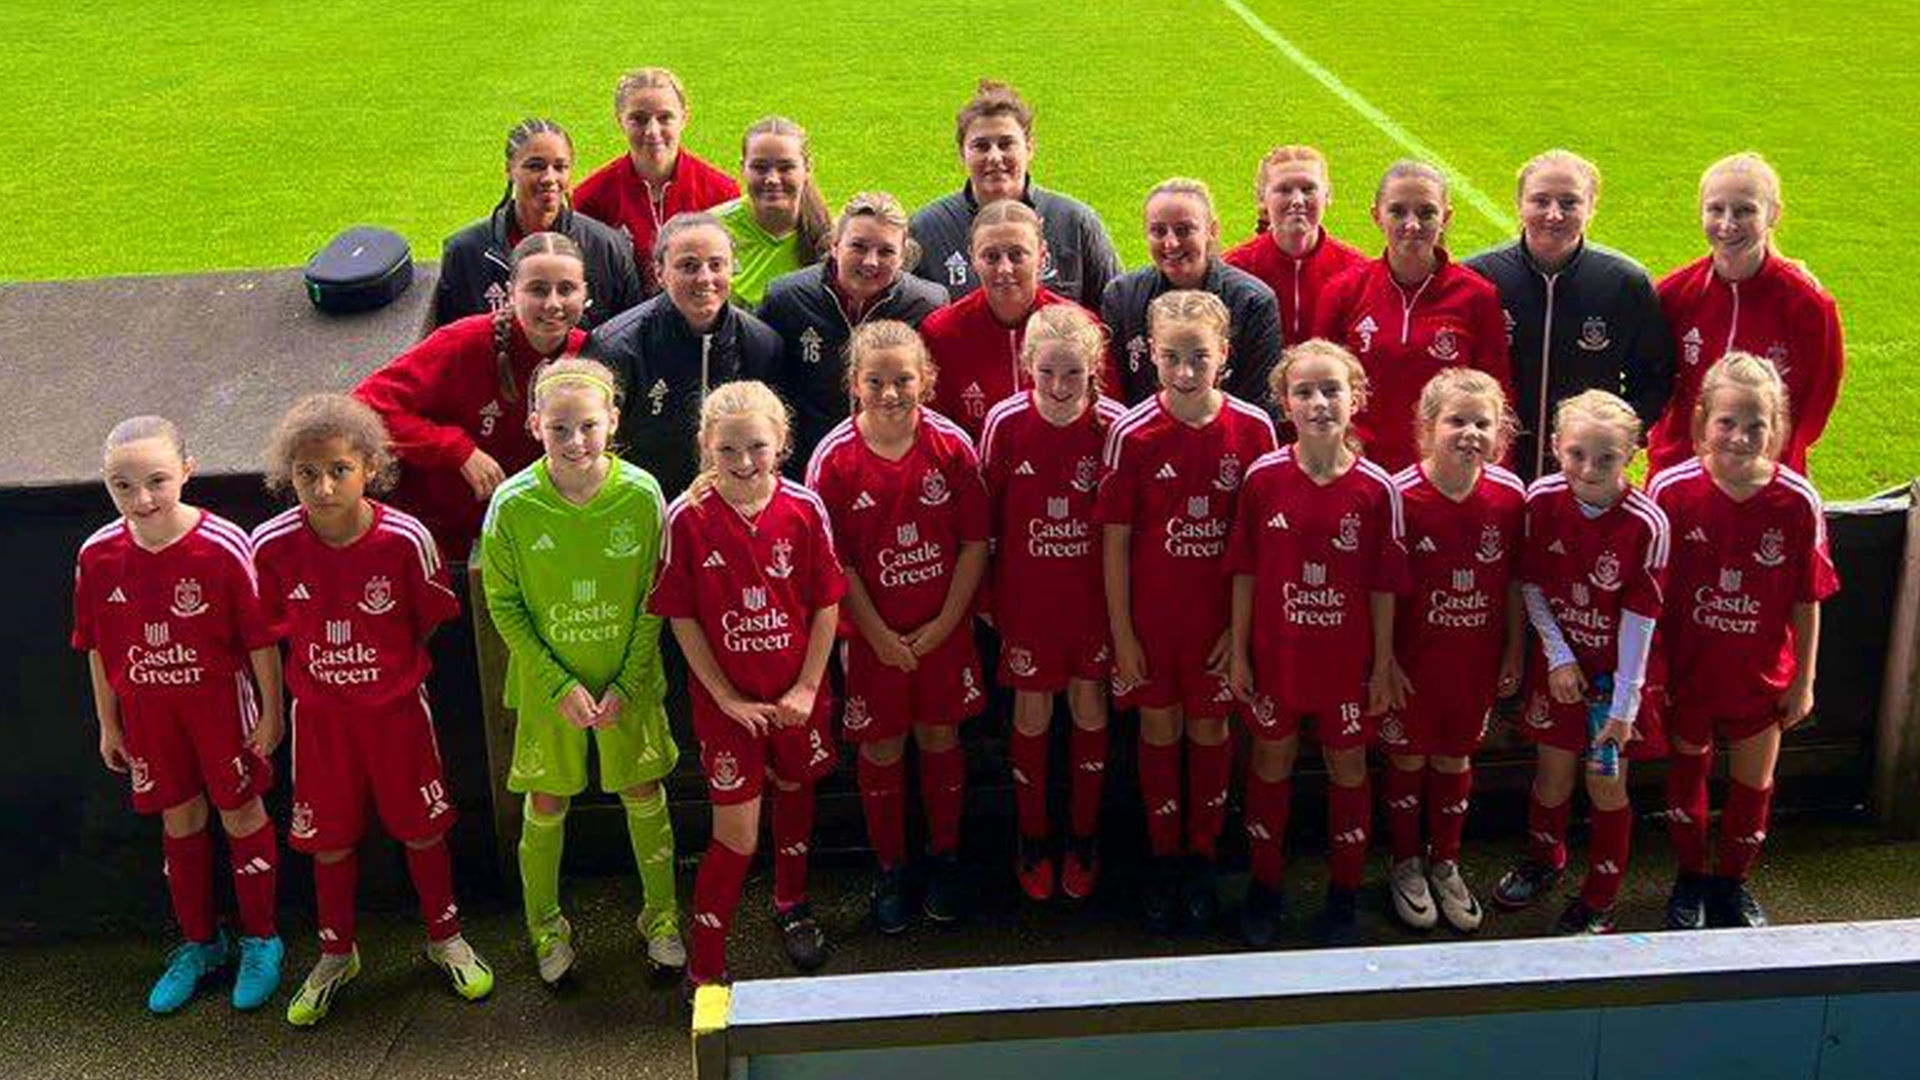 Nomads Girls PDC looking for sponsorship